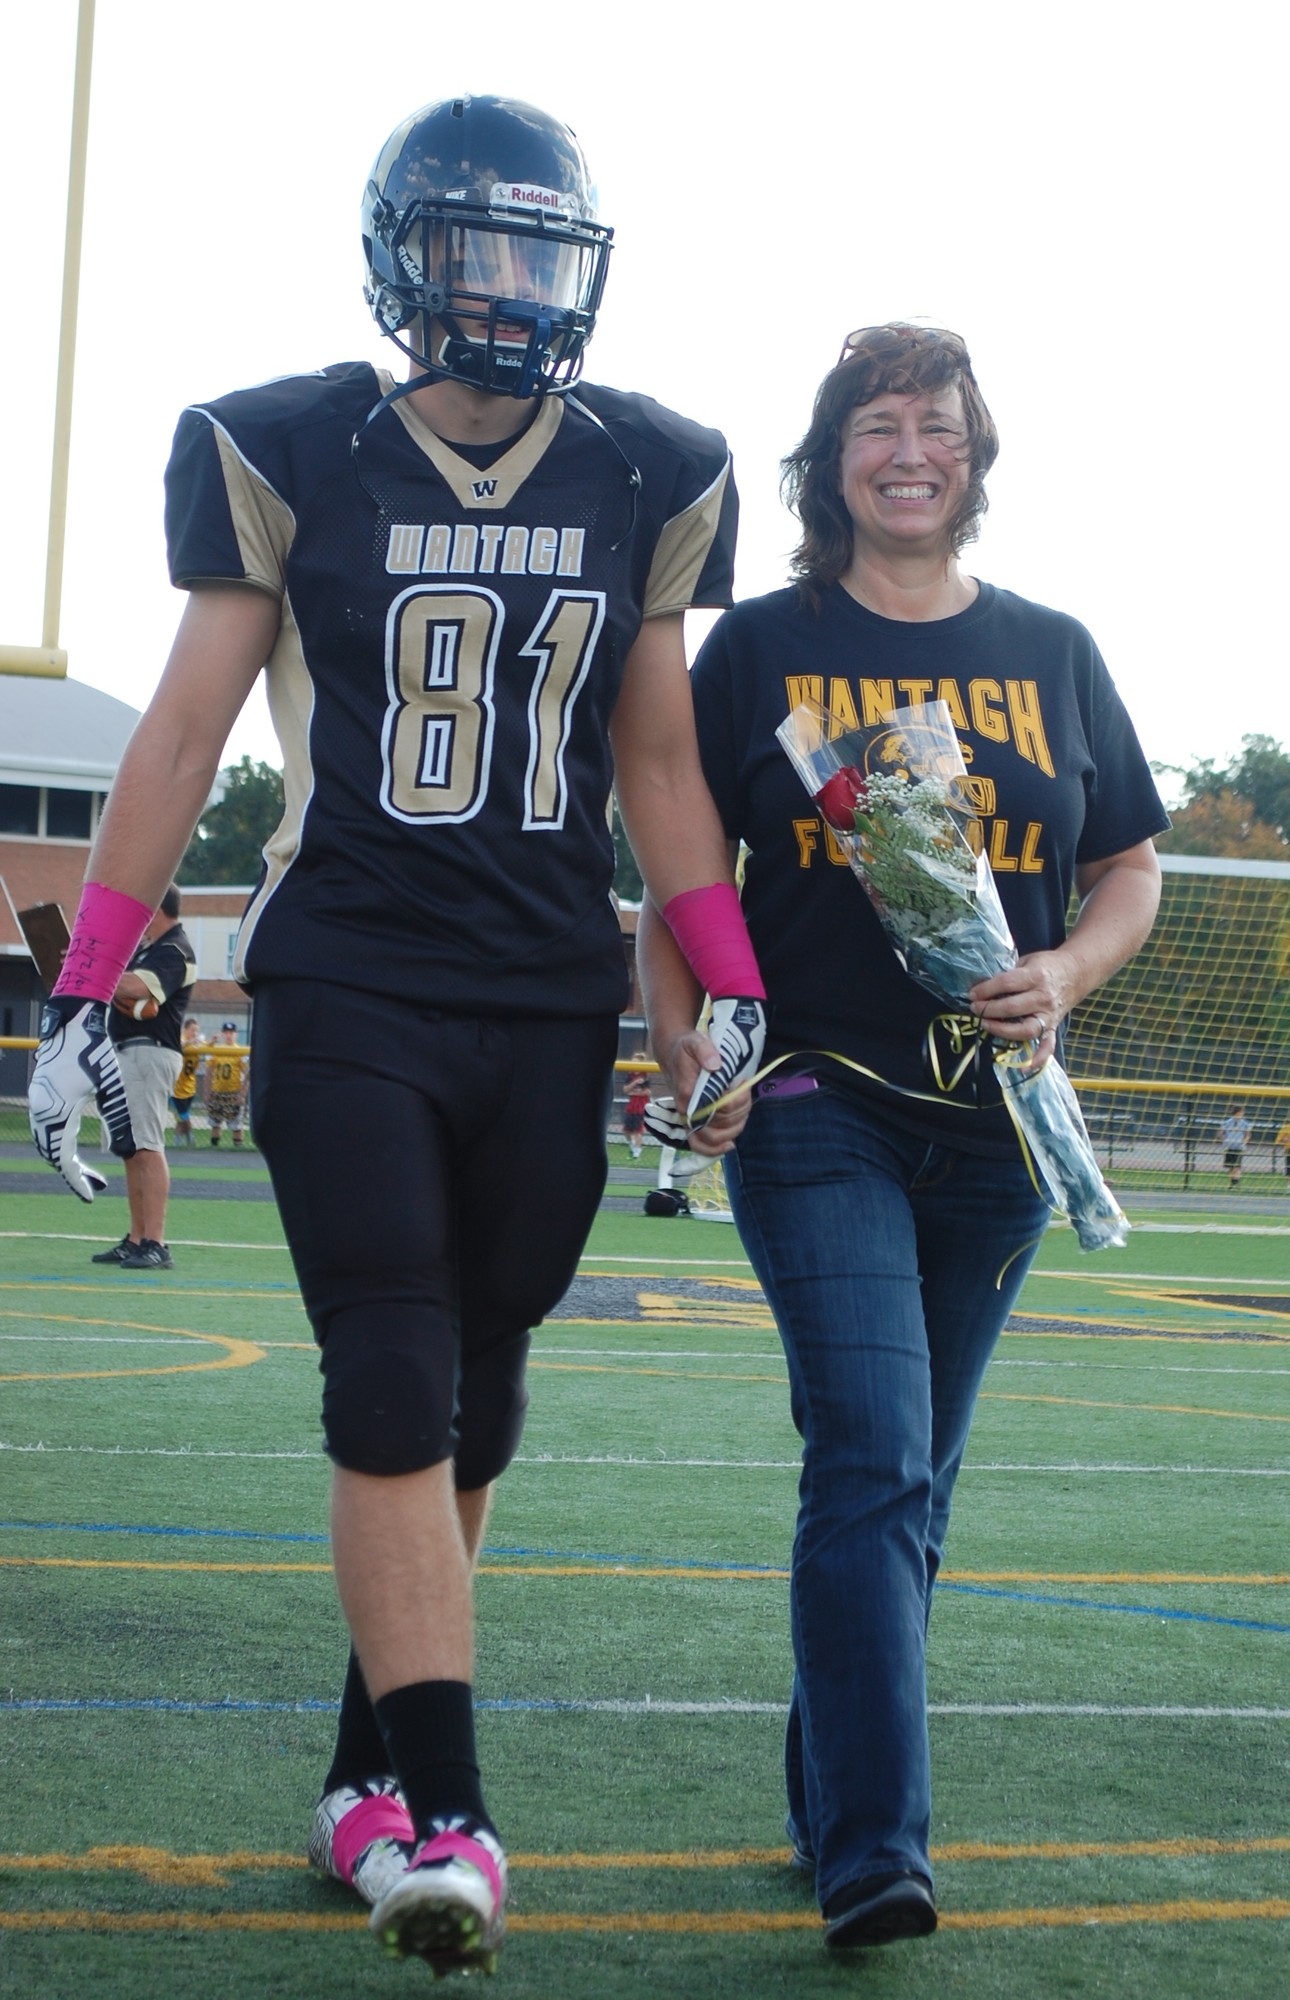 Senior George Williams was escorted onto the field by his mother, Gail.